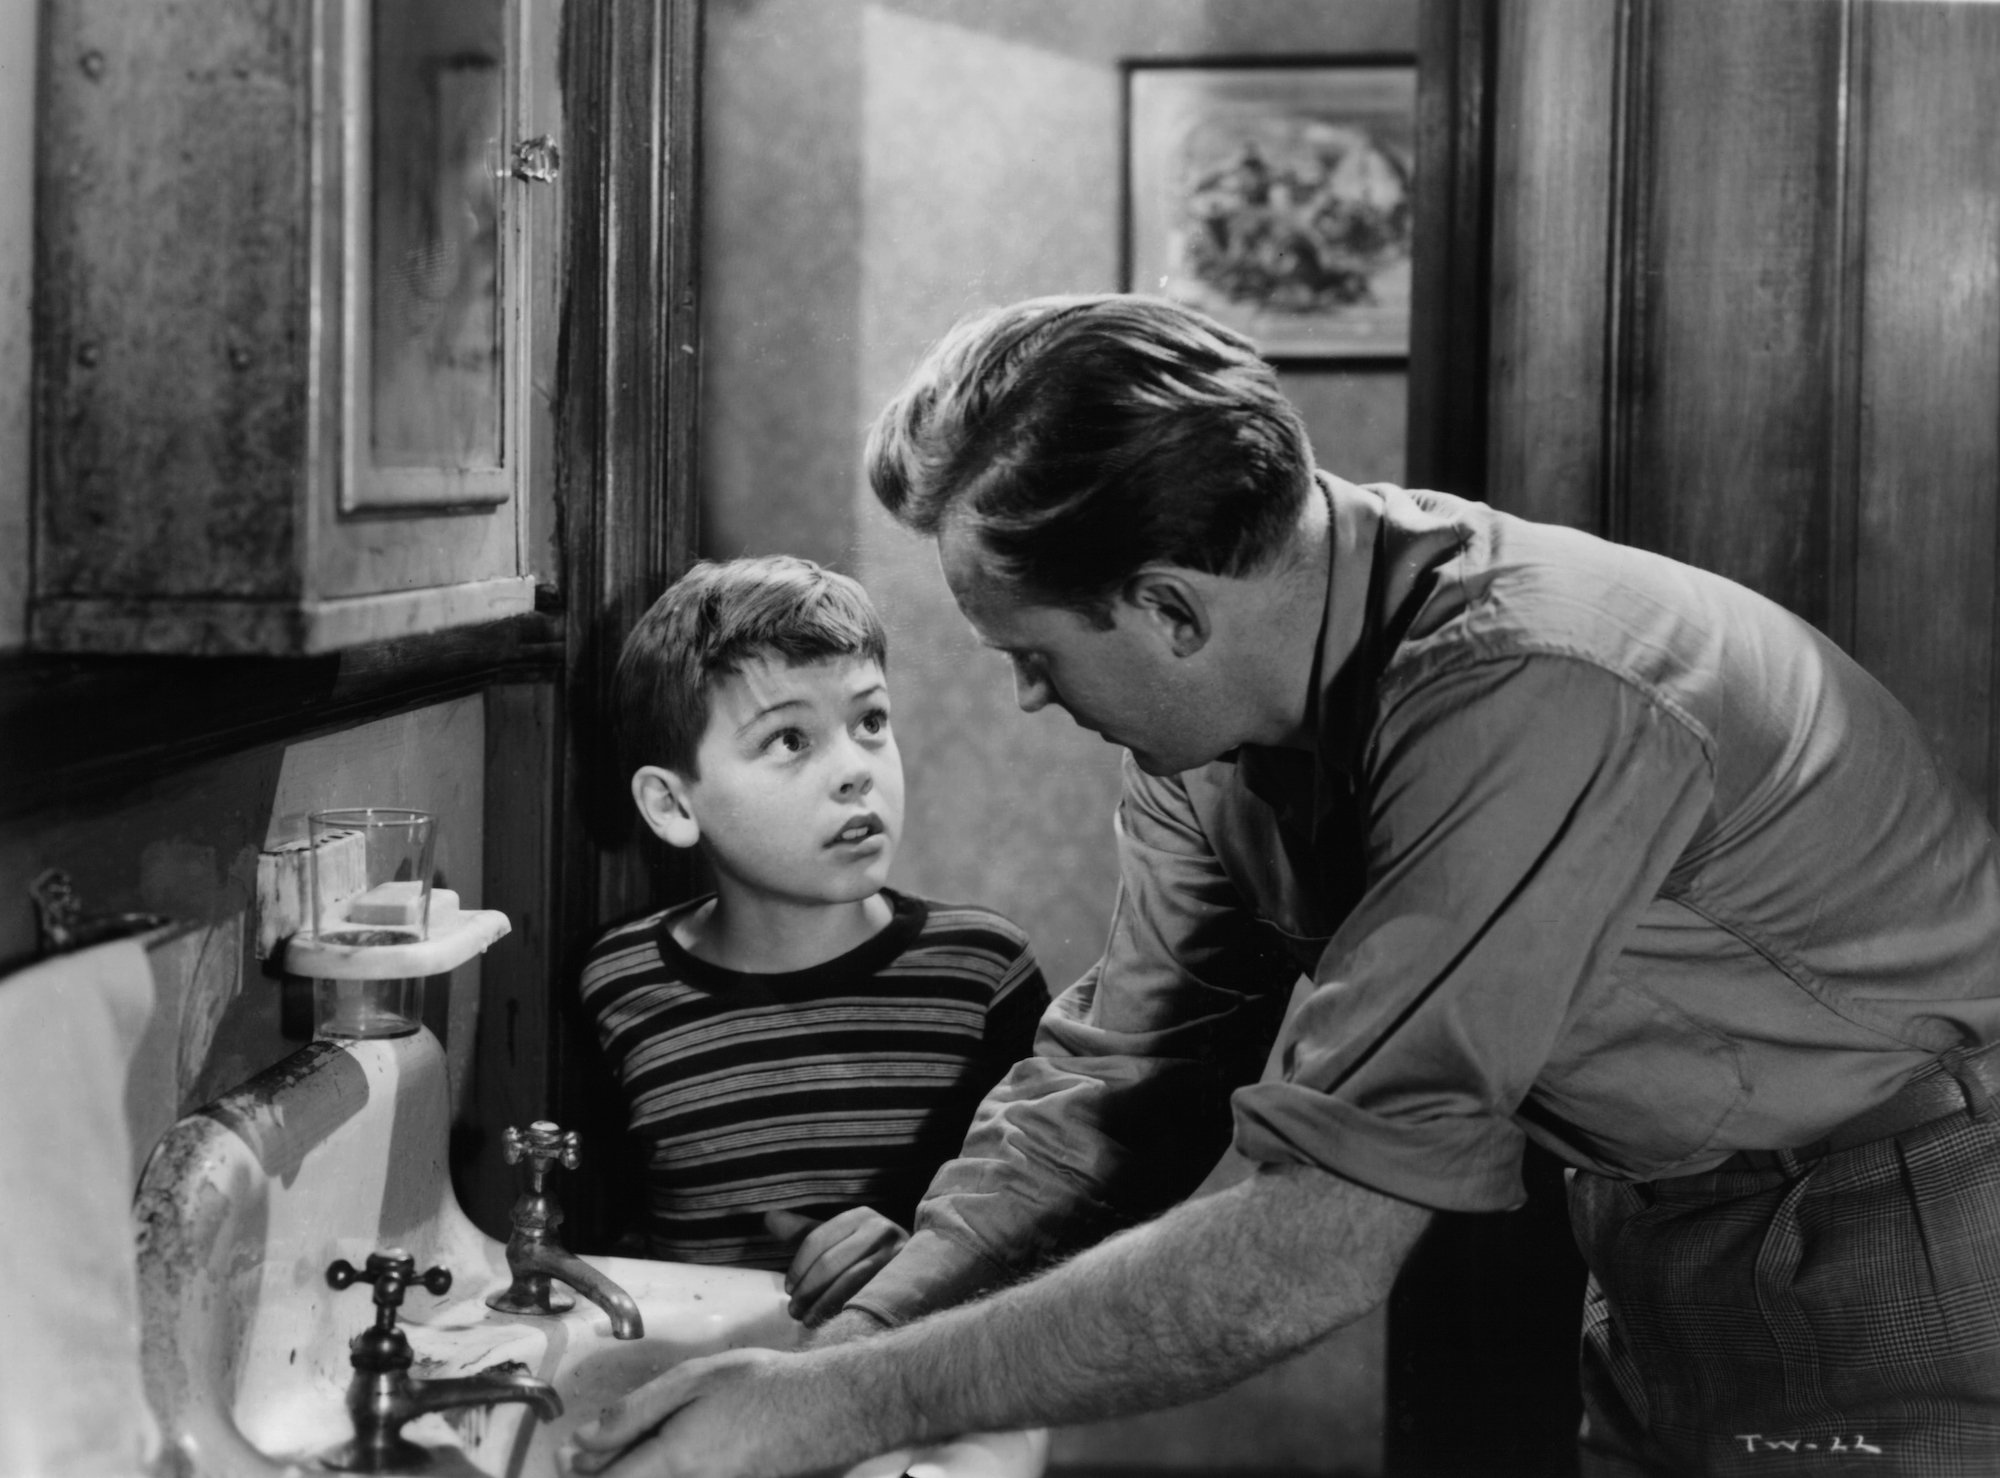 Bobby Driscoll looking up at Arthur Kennedy in a scene from the film 'The Window' in black and white